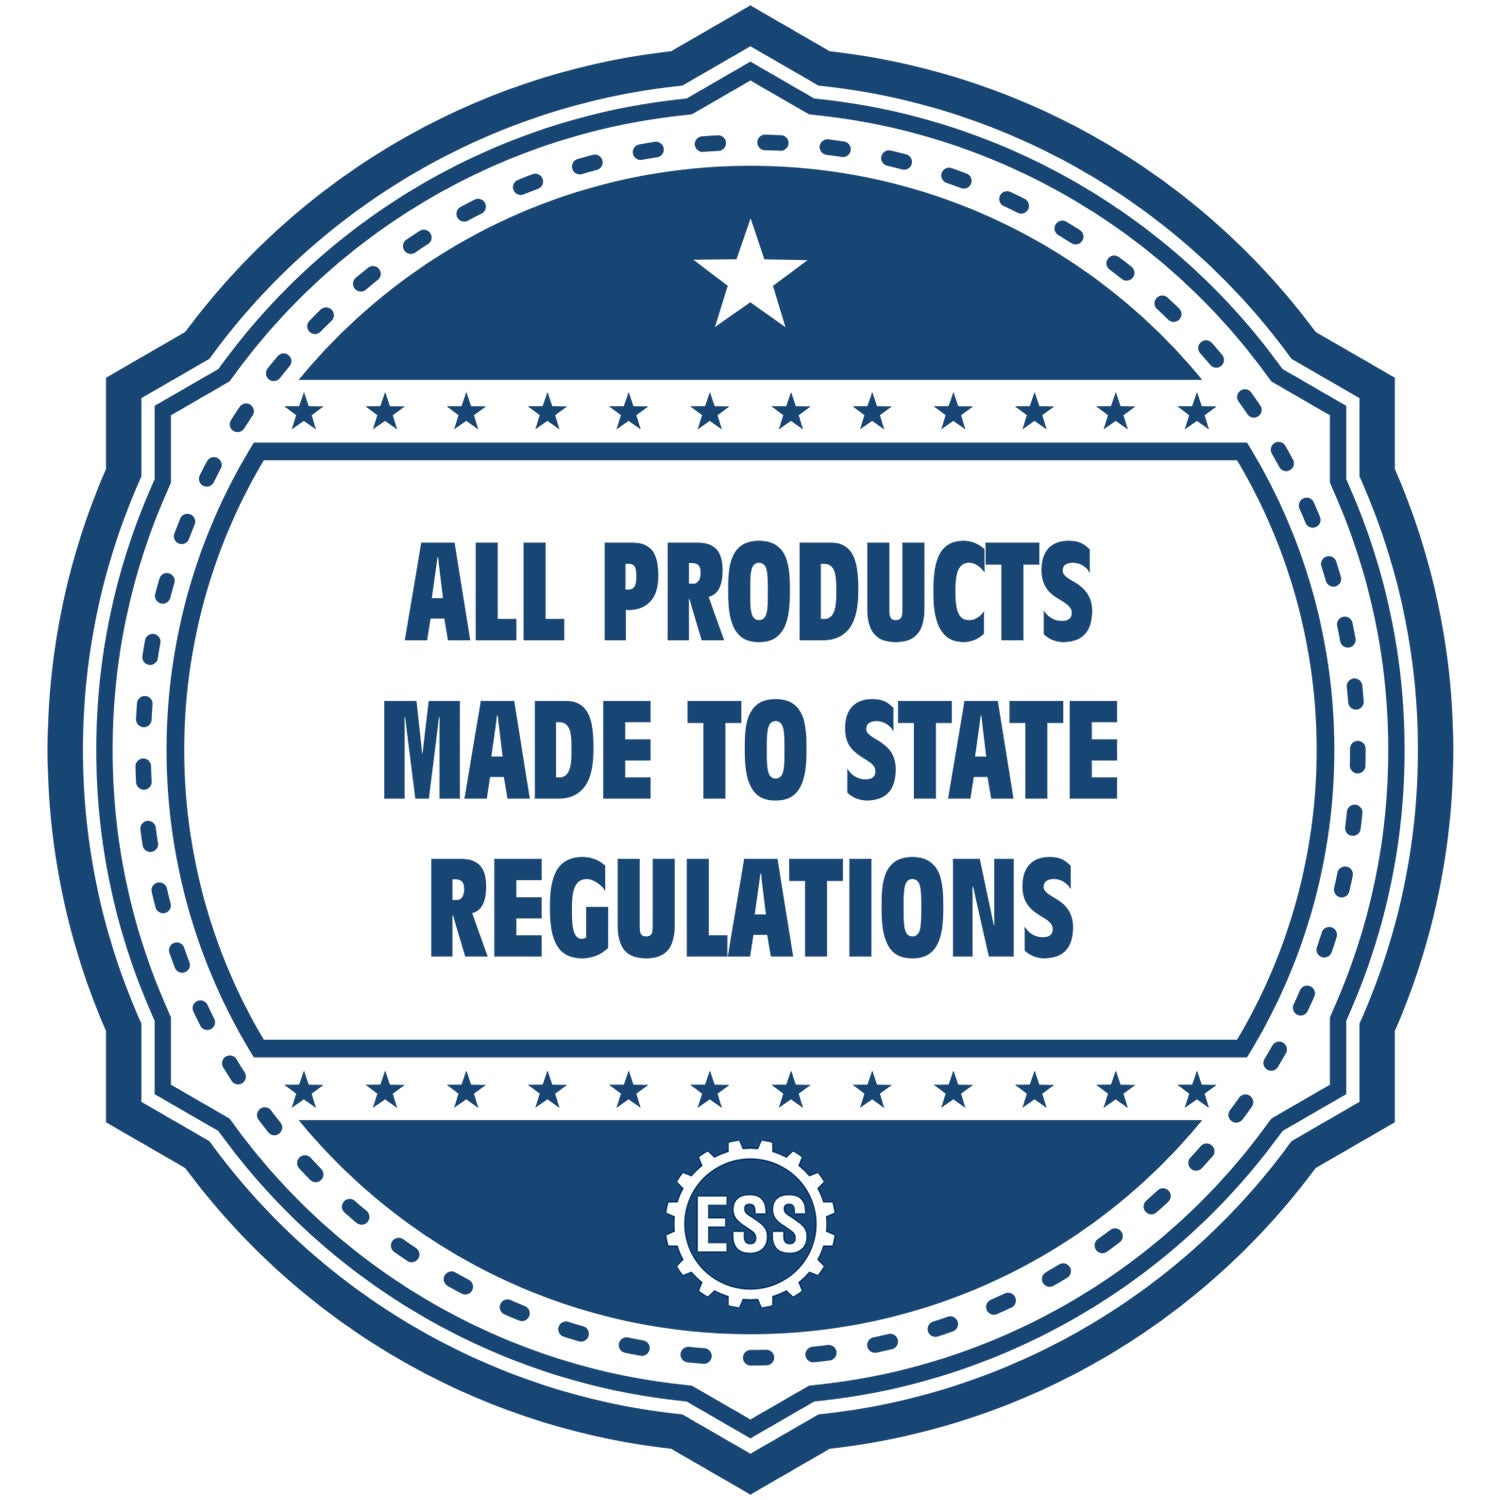 An icon or badge element for the State of Kentucky Handheld Landscape Architect Seal showing that this product is made in compliance with state regulations.